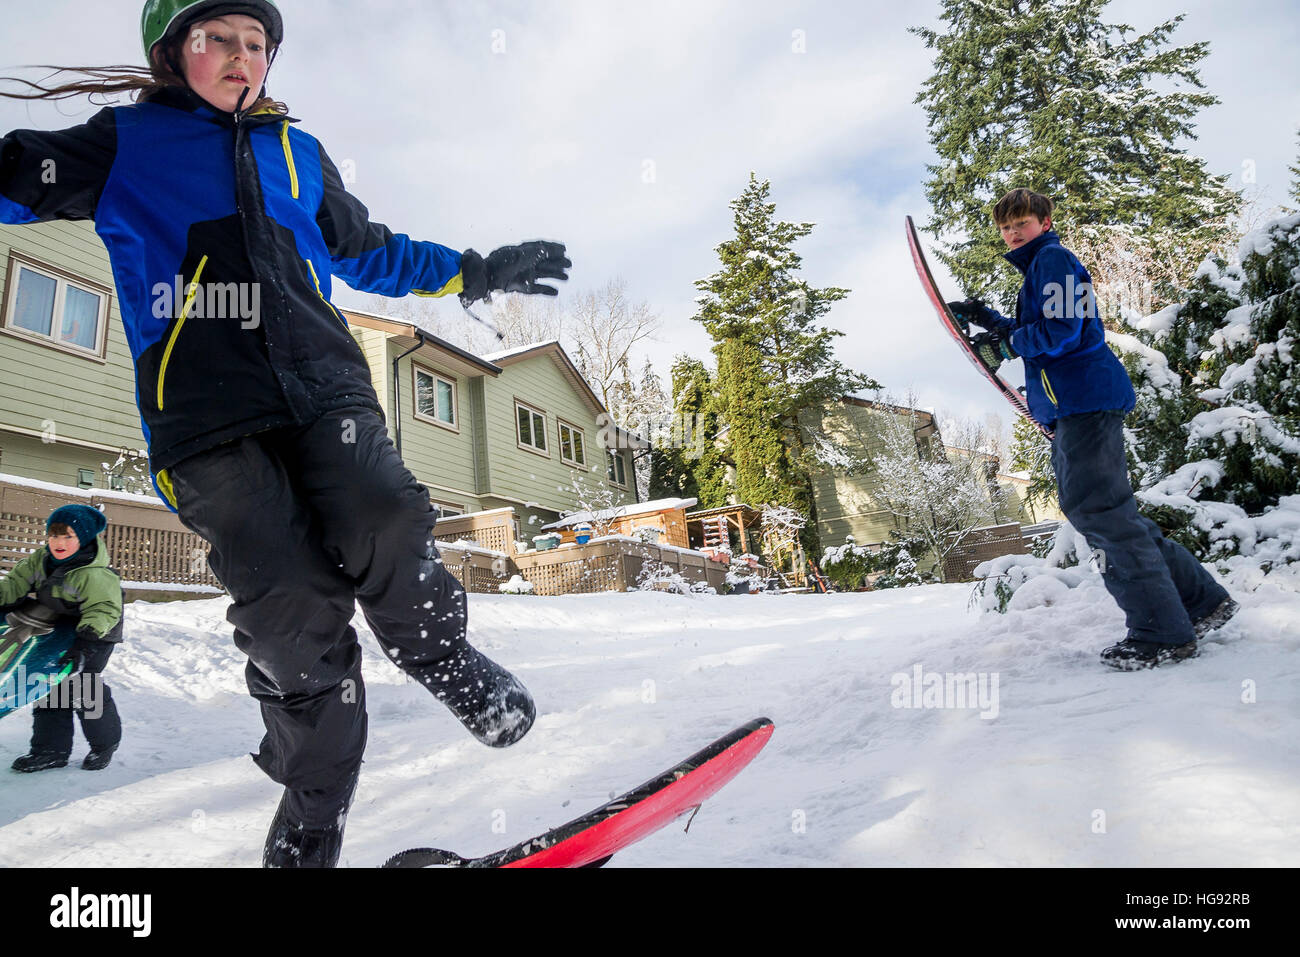 Kids have fun in the snow, Burnaby, British Columbia, Canada. Stock Photo